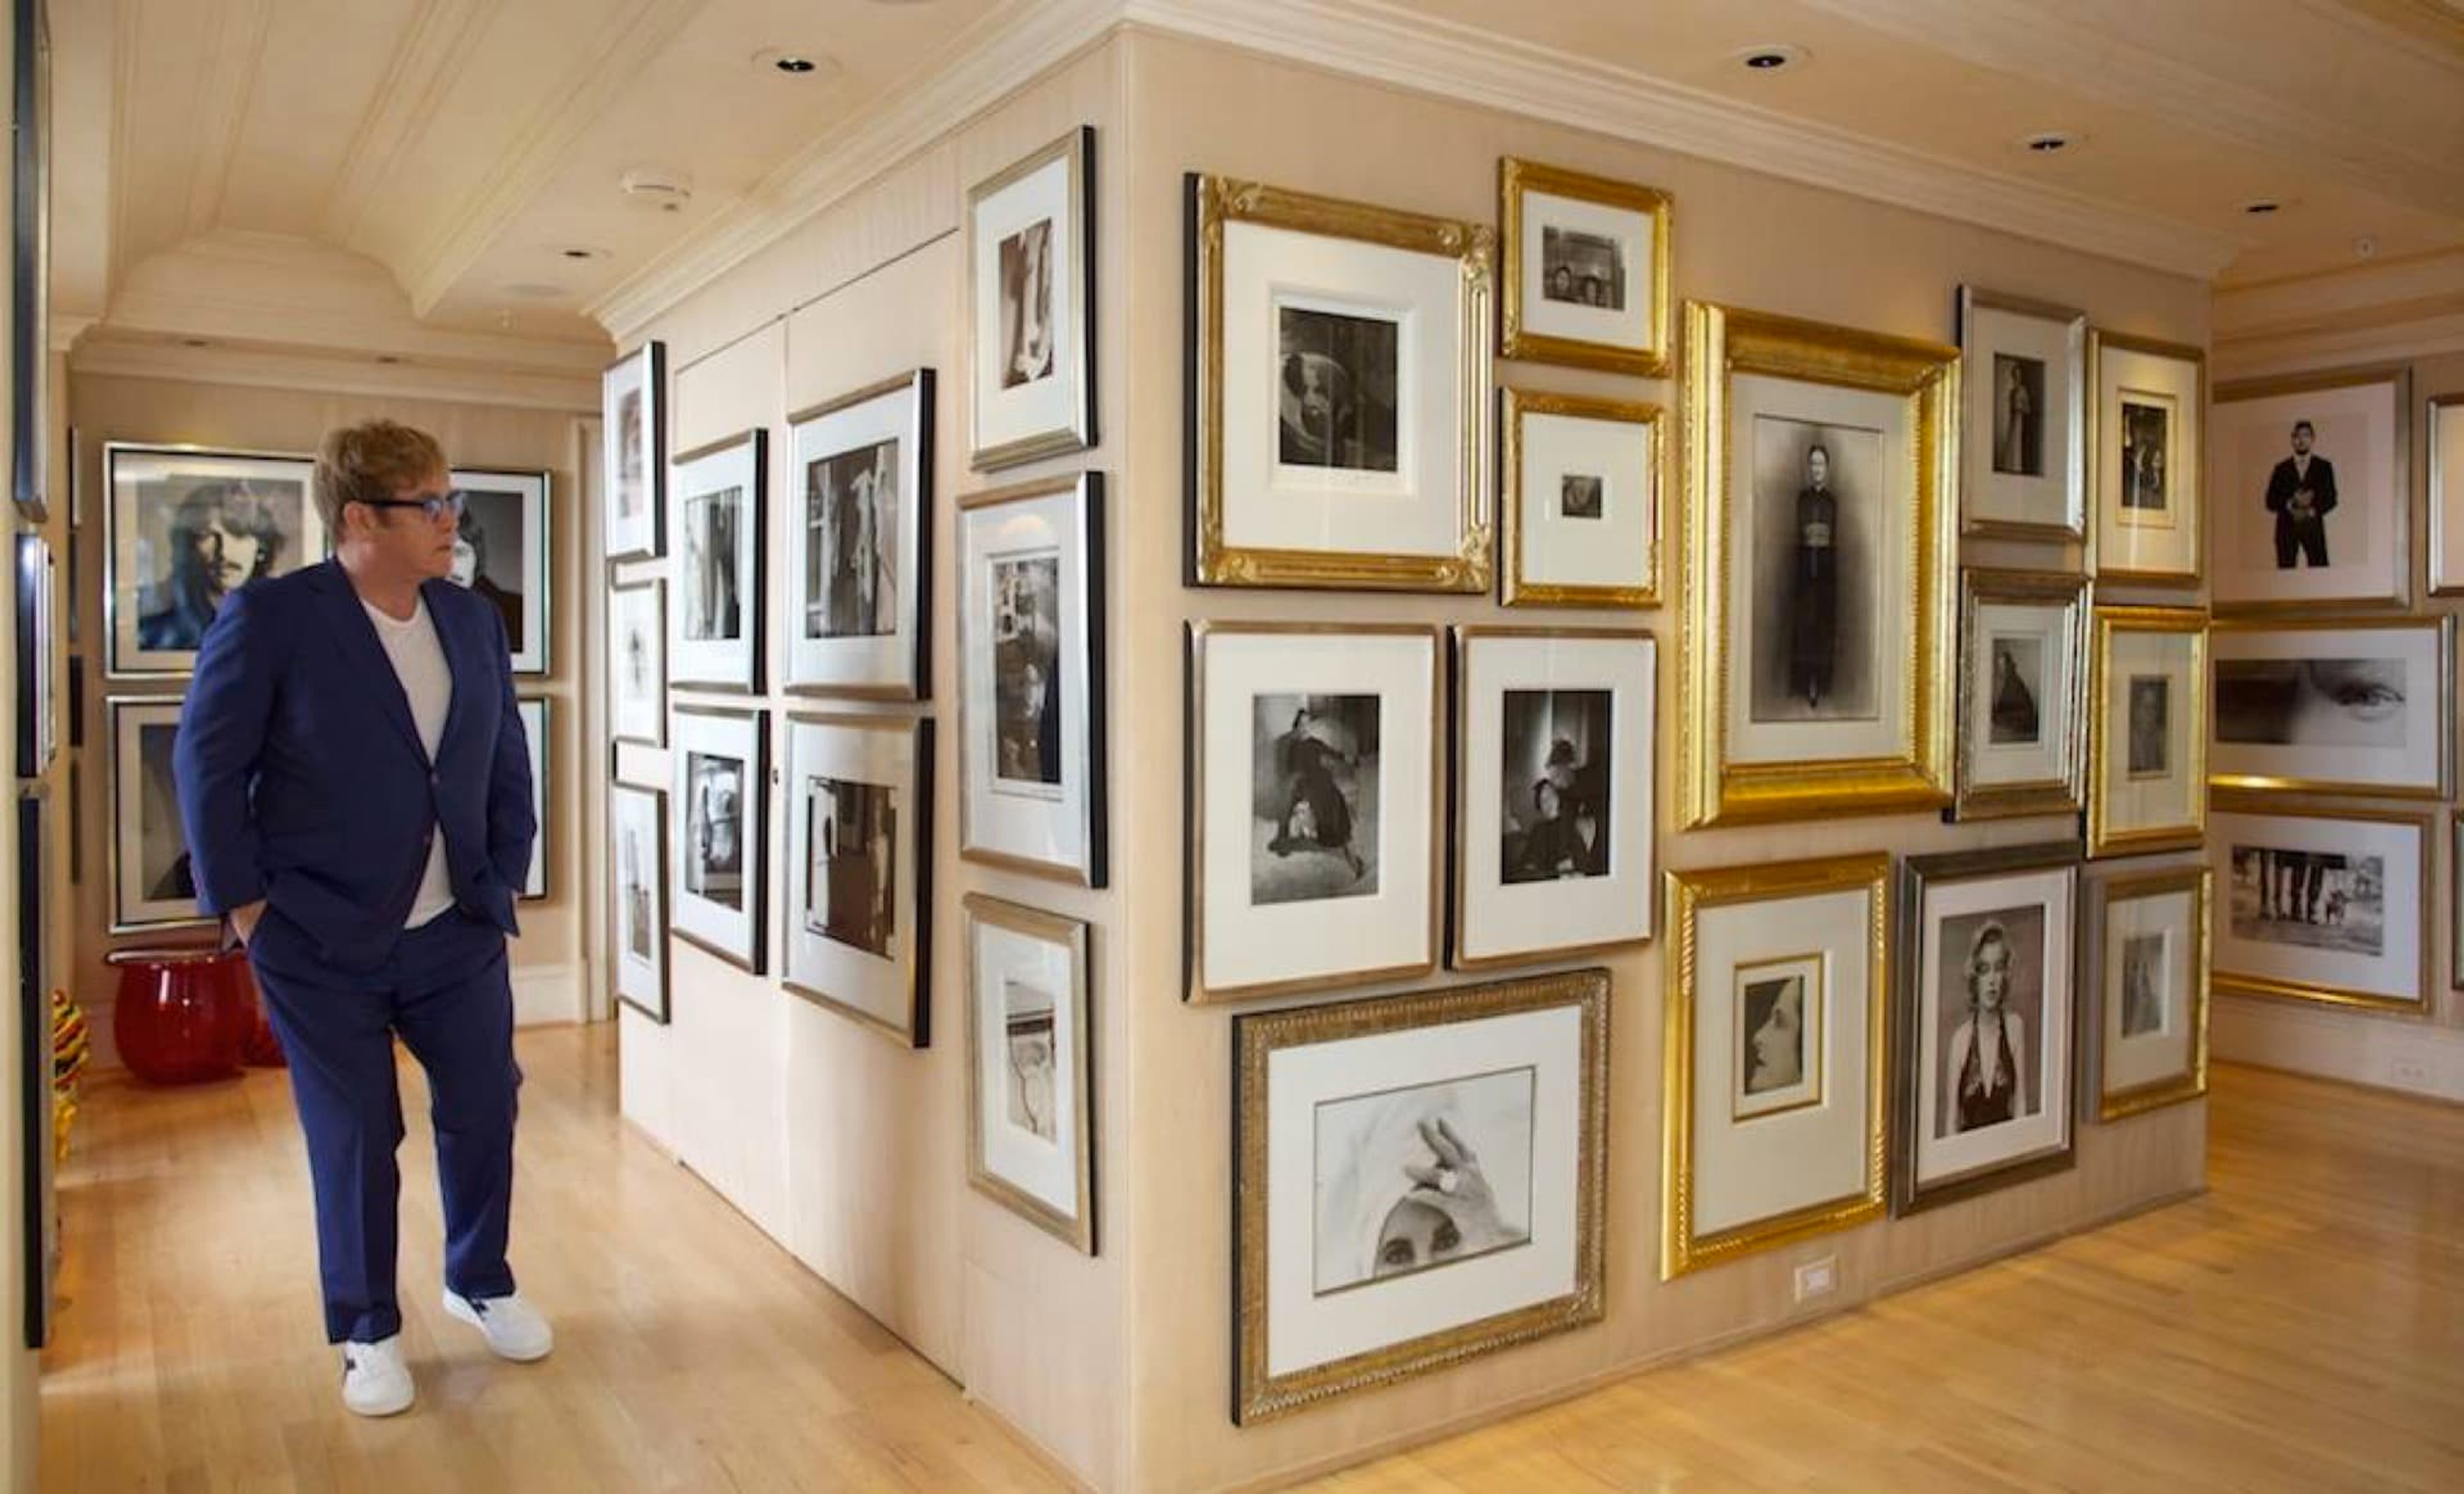 An image of Elton John in his house, surrounded by some of his photographs hanging on the walls.